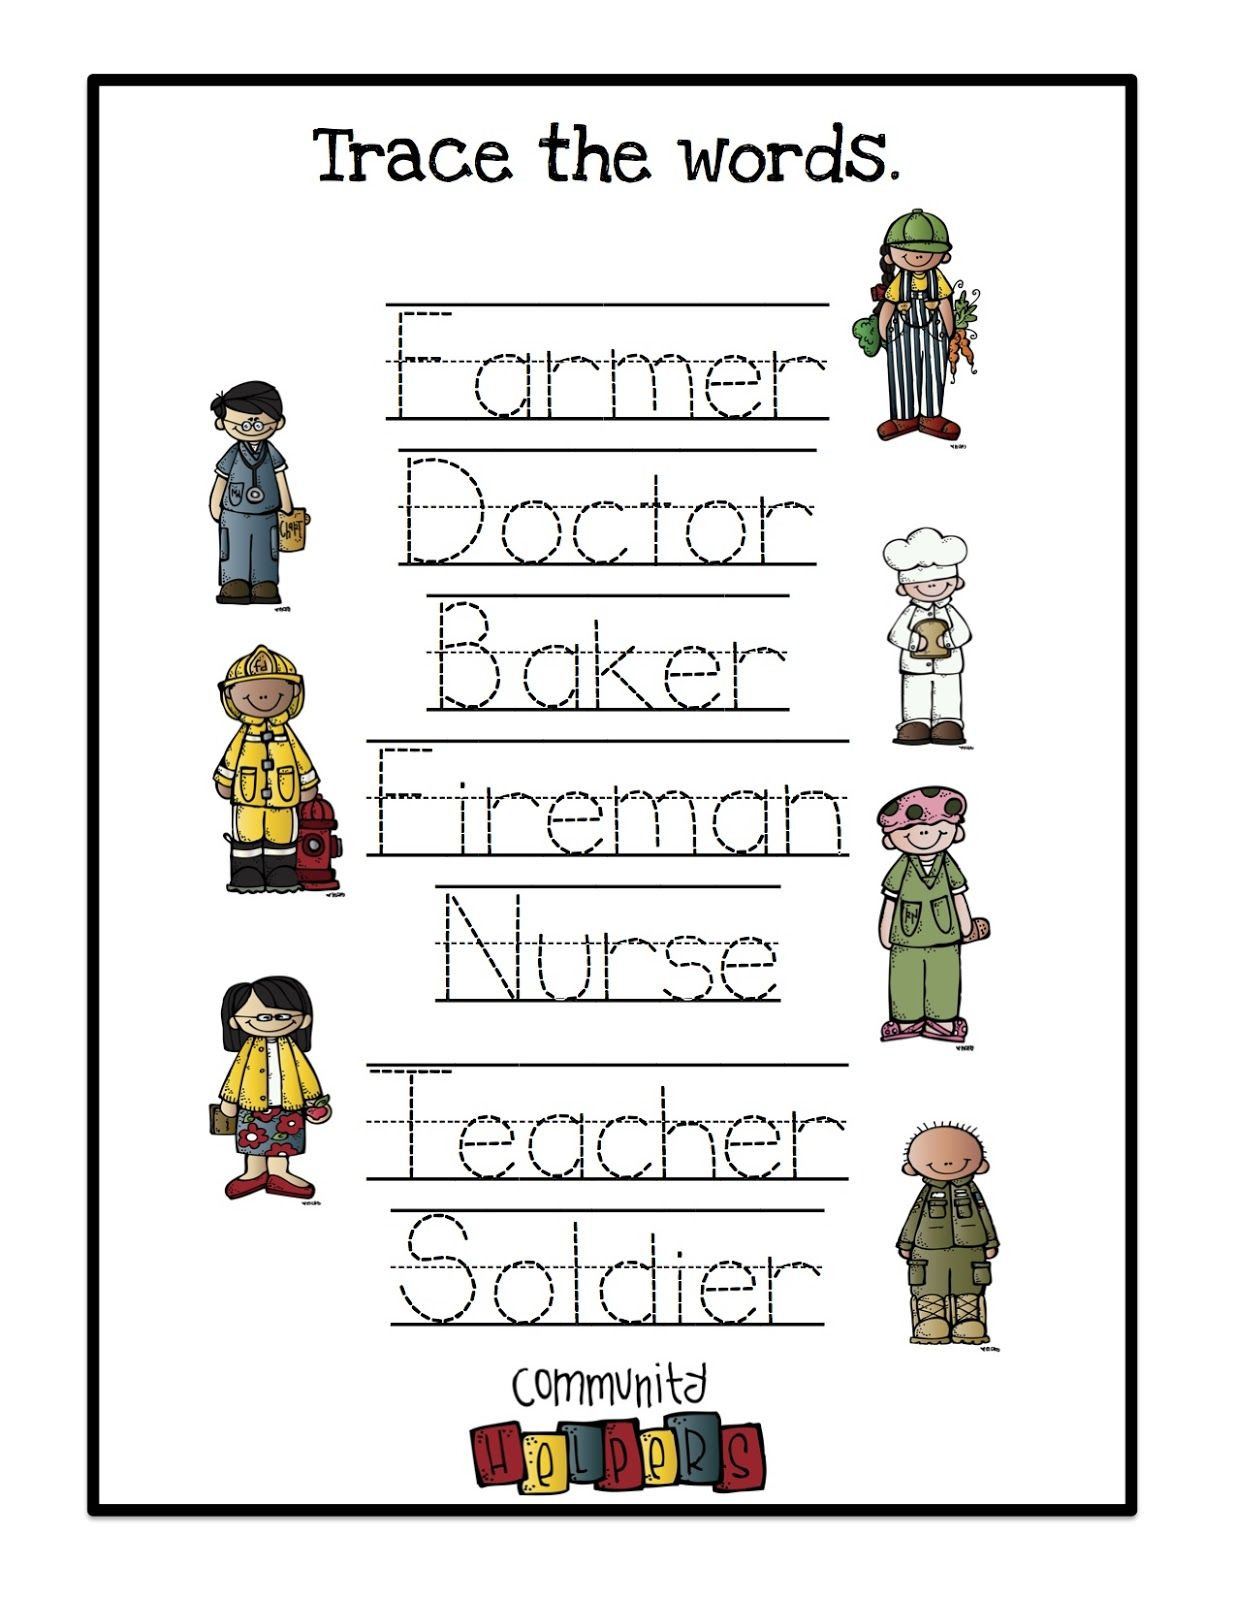 Community Helpers Lesson Plan Trace the Words 1 1 236×1 600 Pixels